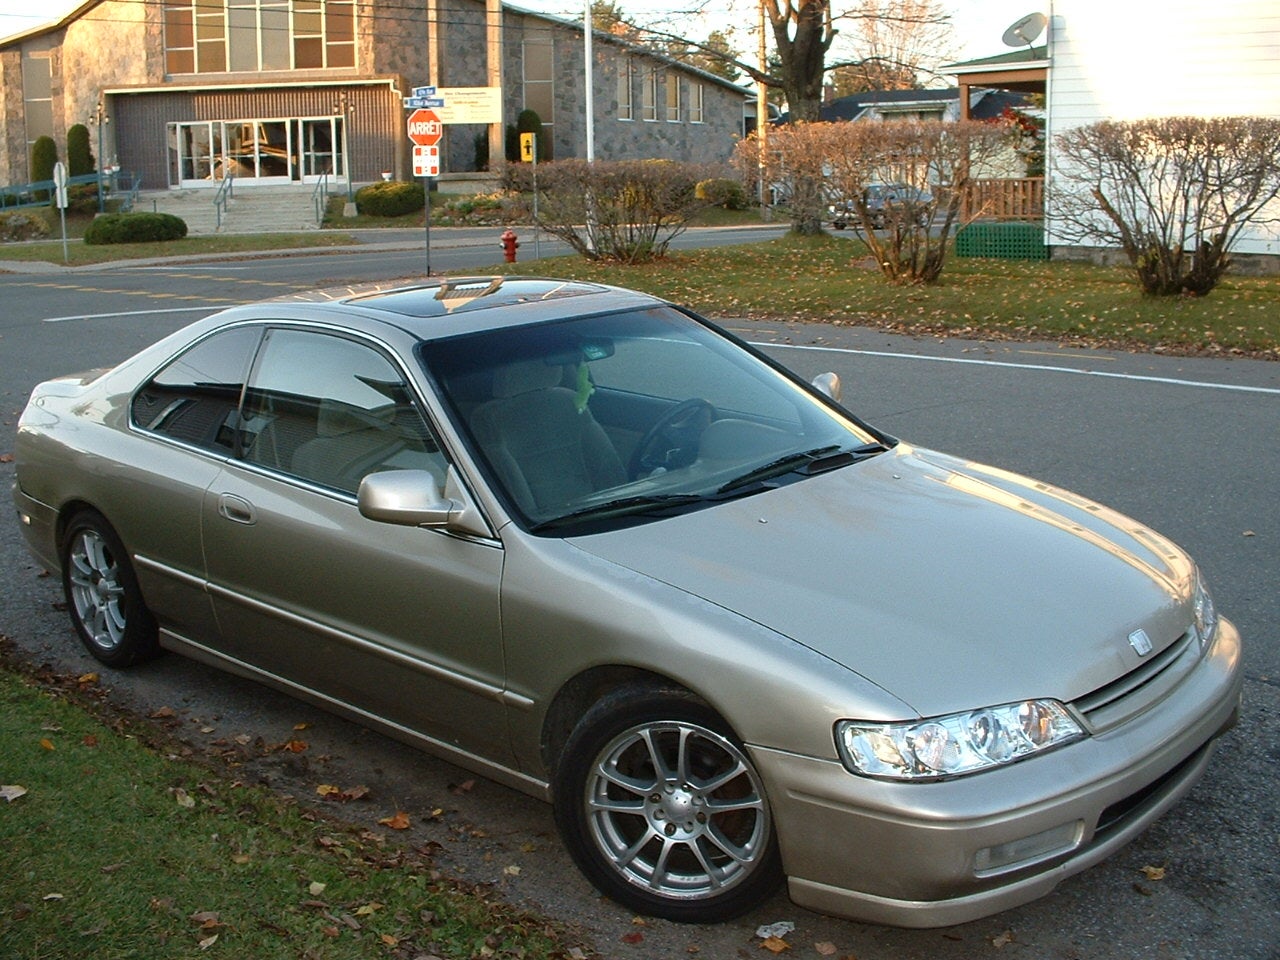 1994 Honda Accord Coupe Mpg 1, 1280x960 in 329.5KB. 